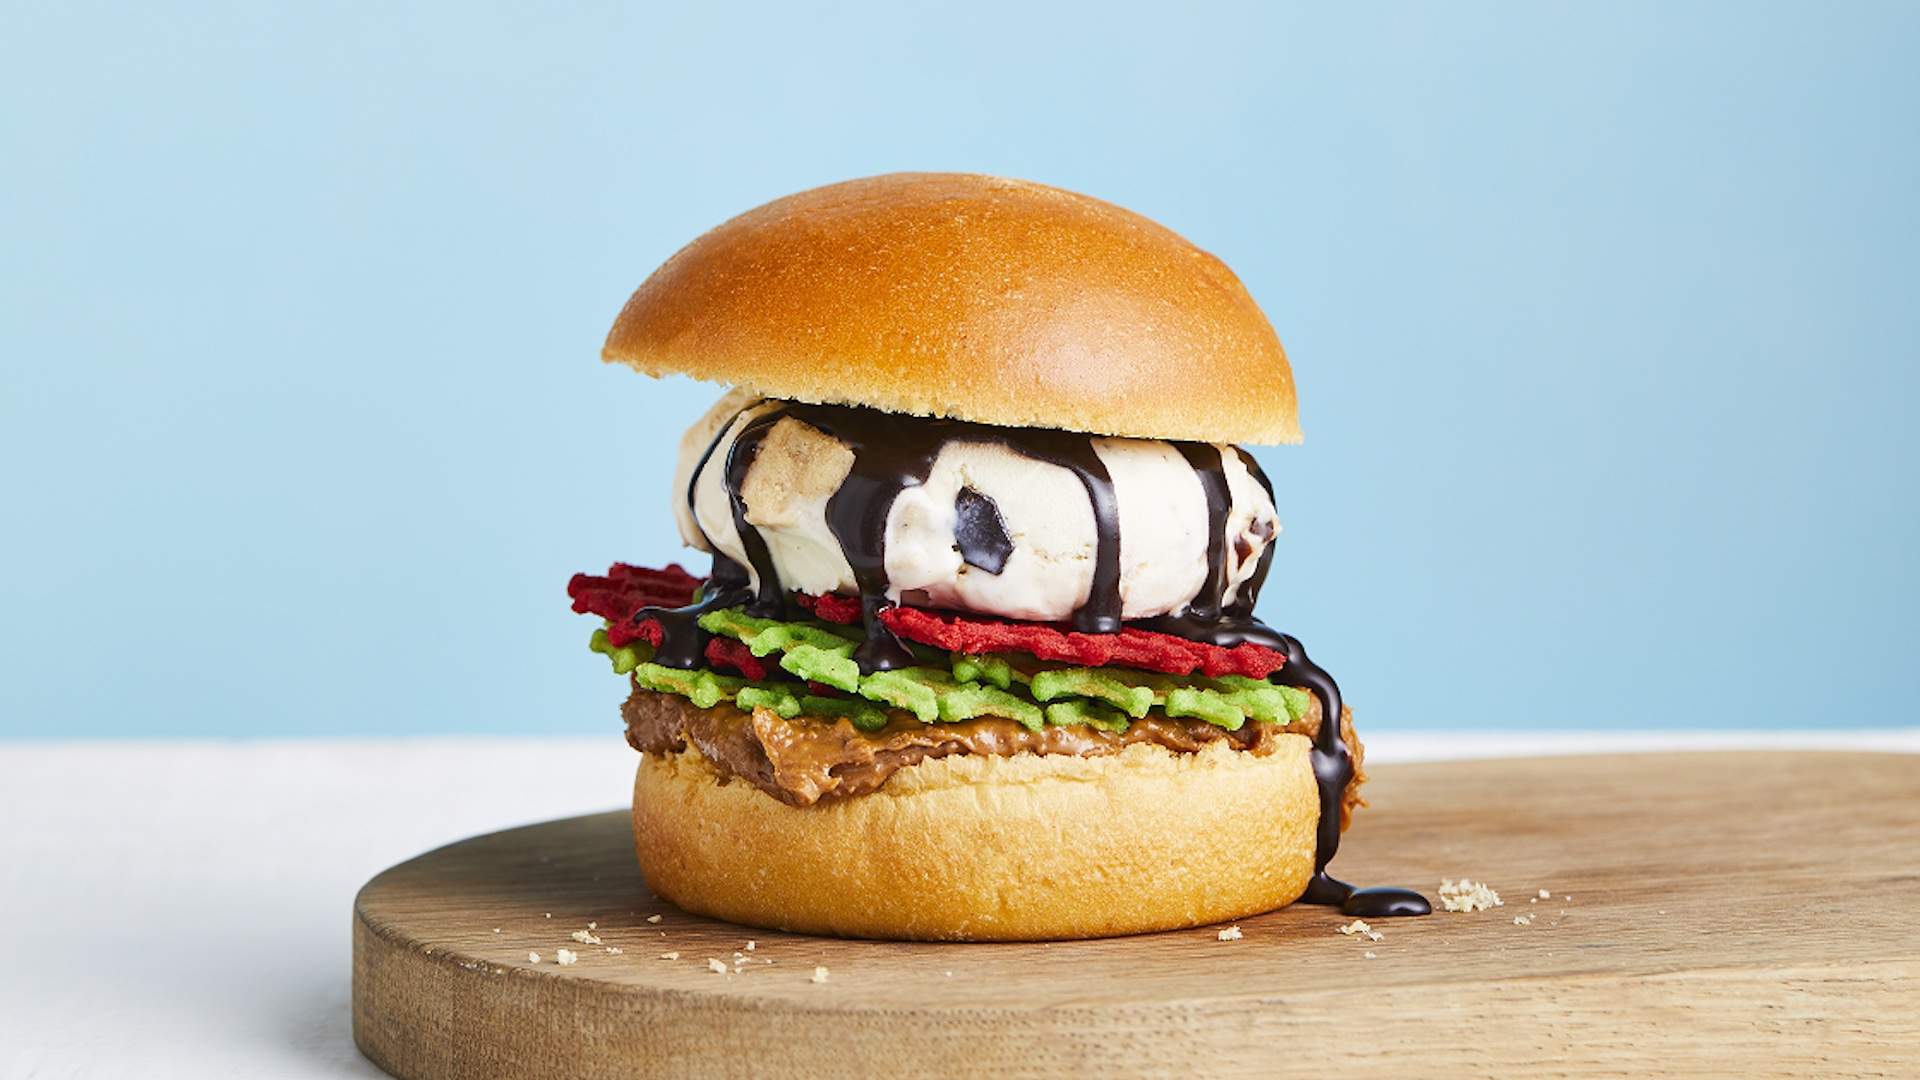 Ben and Jerry's Has Released an Over-the-Top Ice Cream Burger